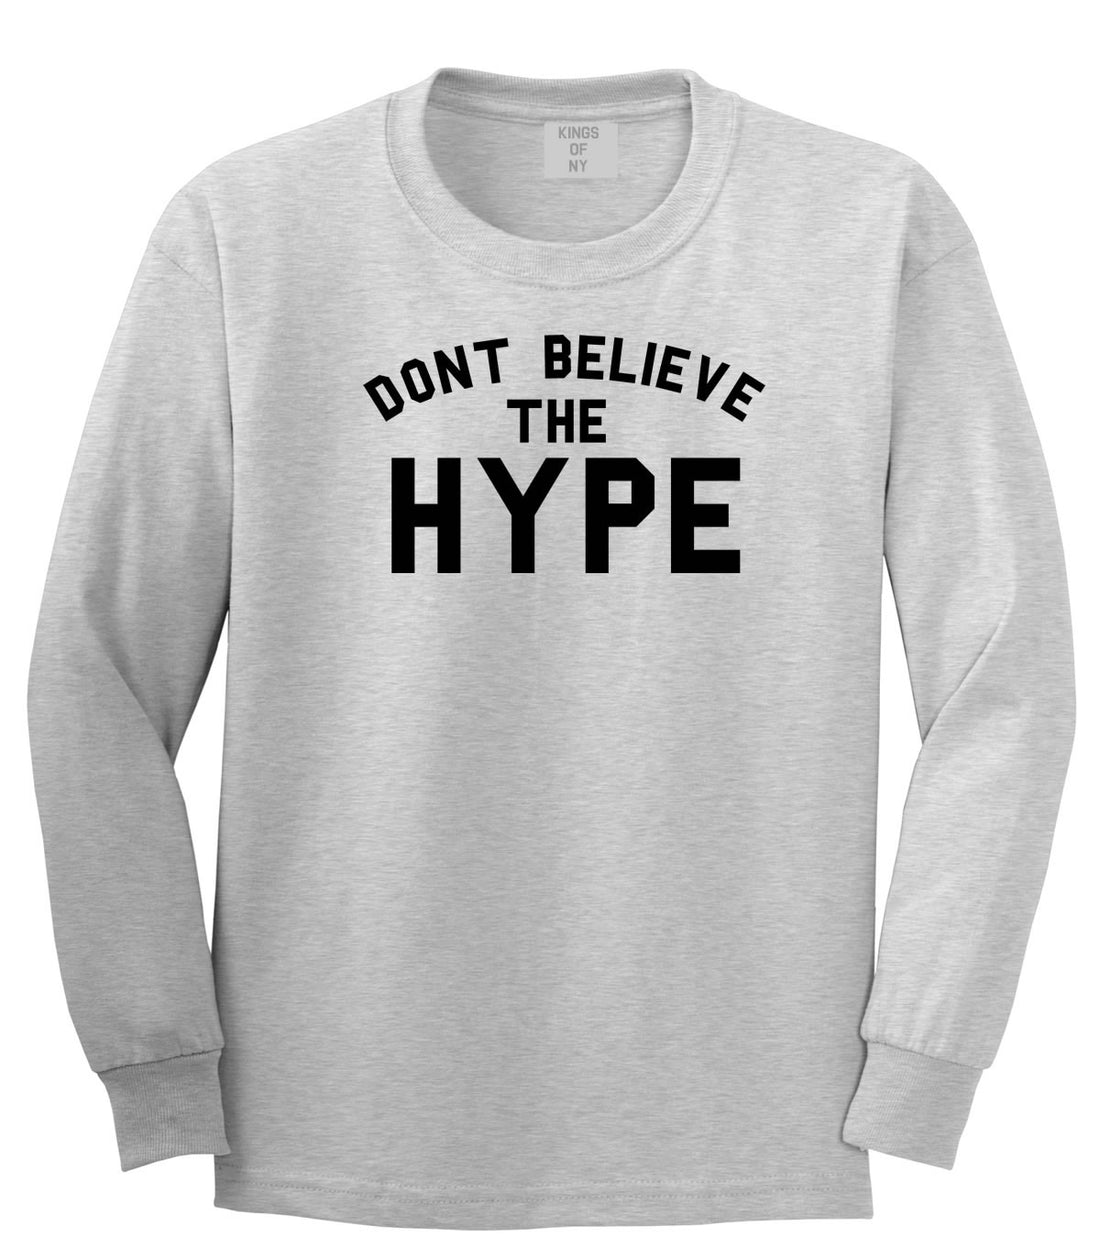 Don't Believe The Hype Long Sleeve T-Shirt in Grey By Kings Of NY